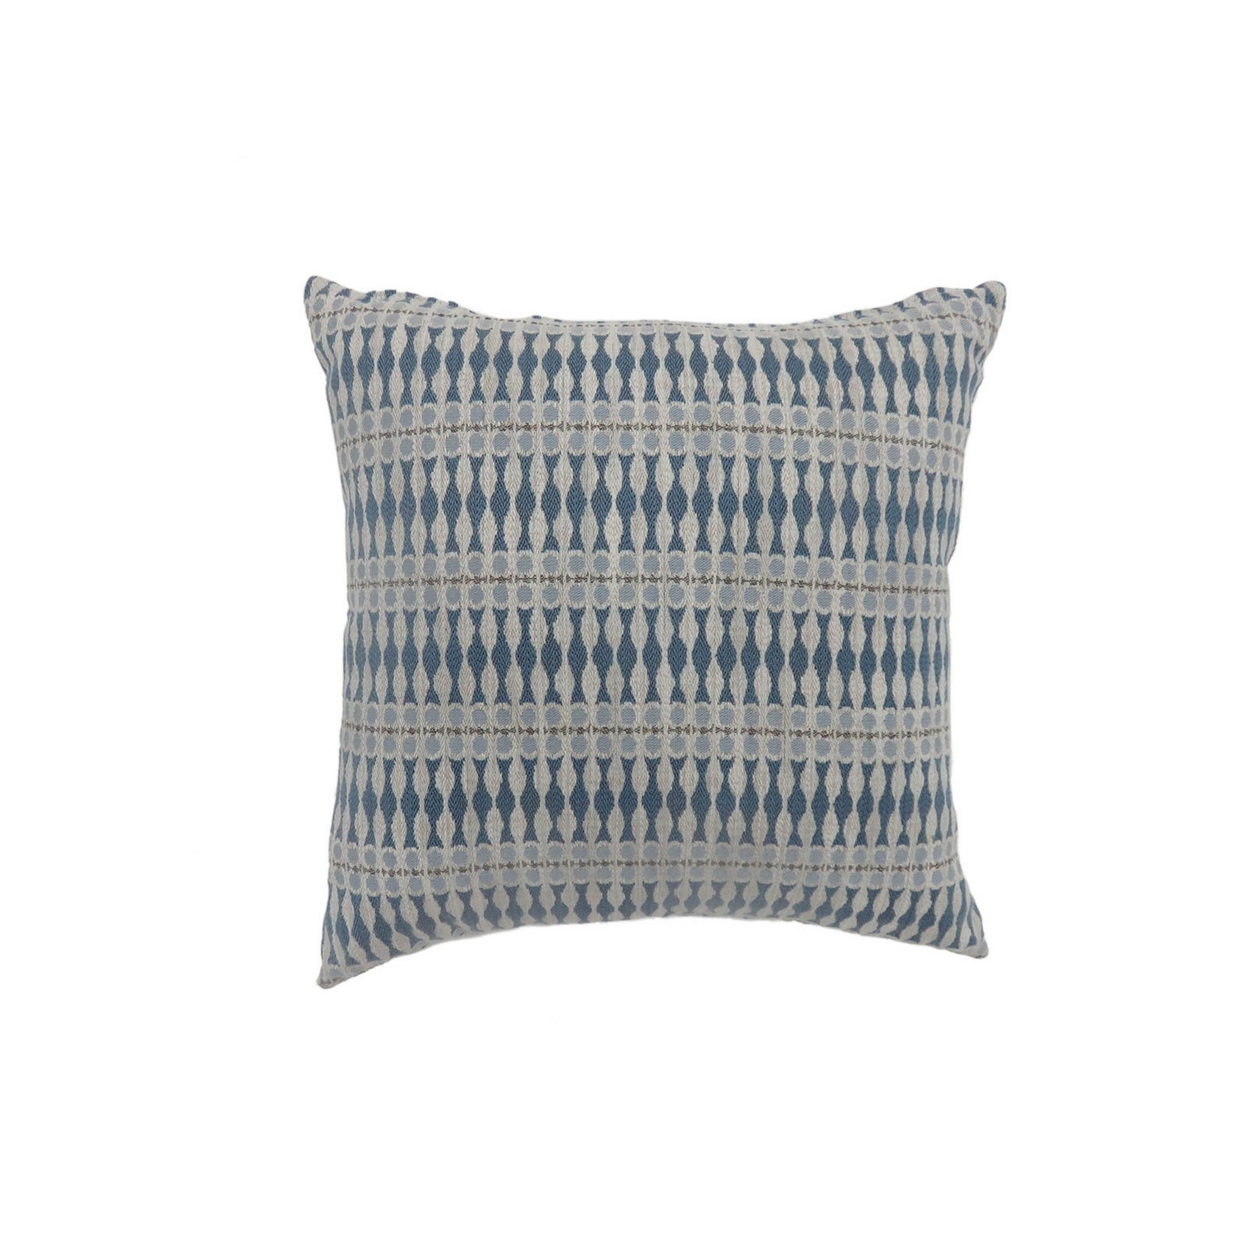 22 Inch Throw Pillow, Set Of 2, Tribal Design Pattern Polyester Fabric, Gray, Blue